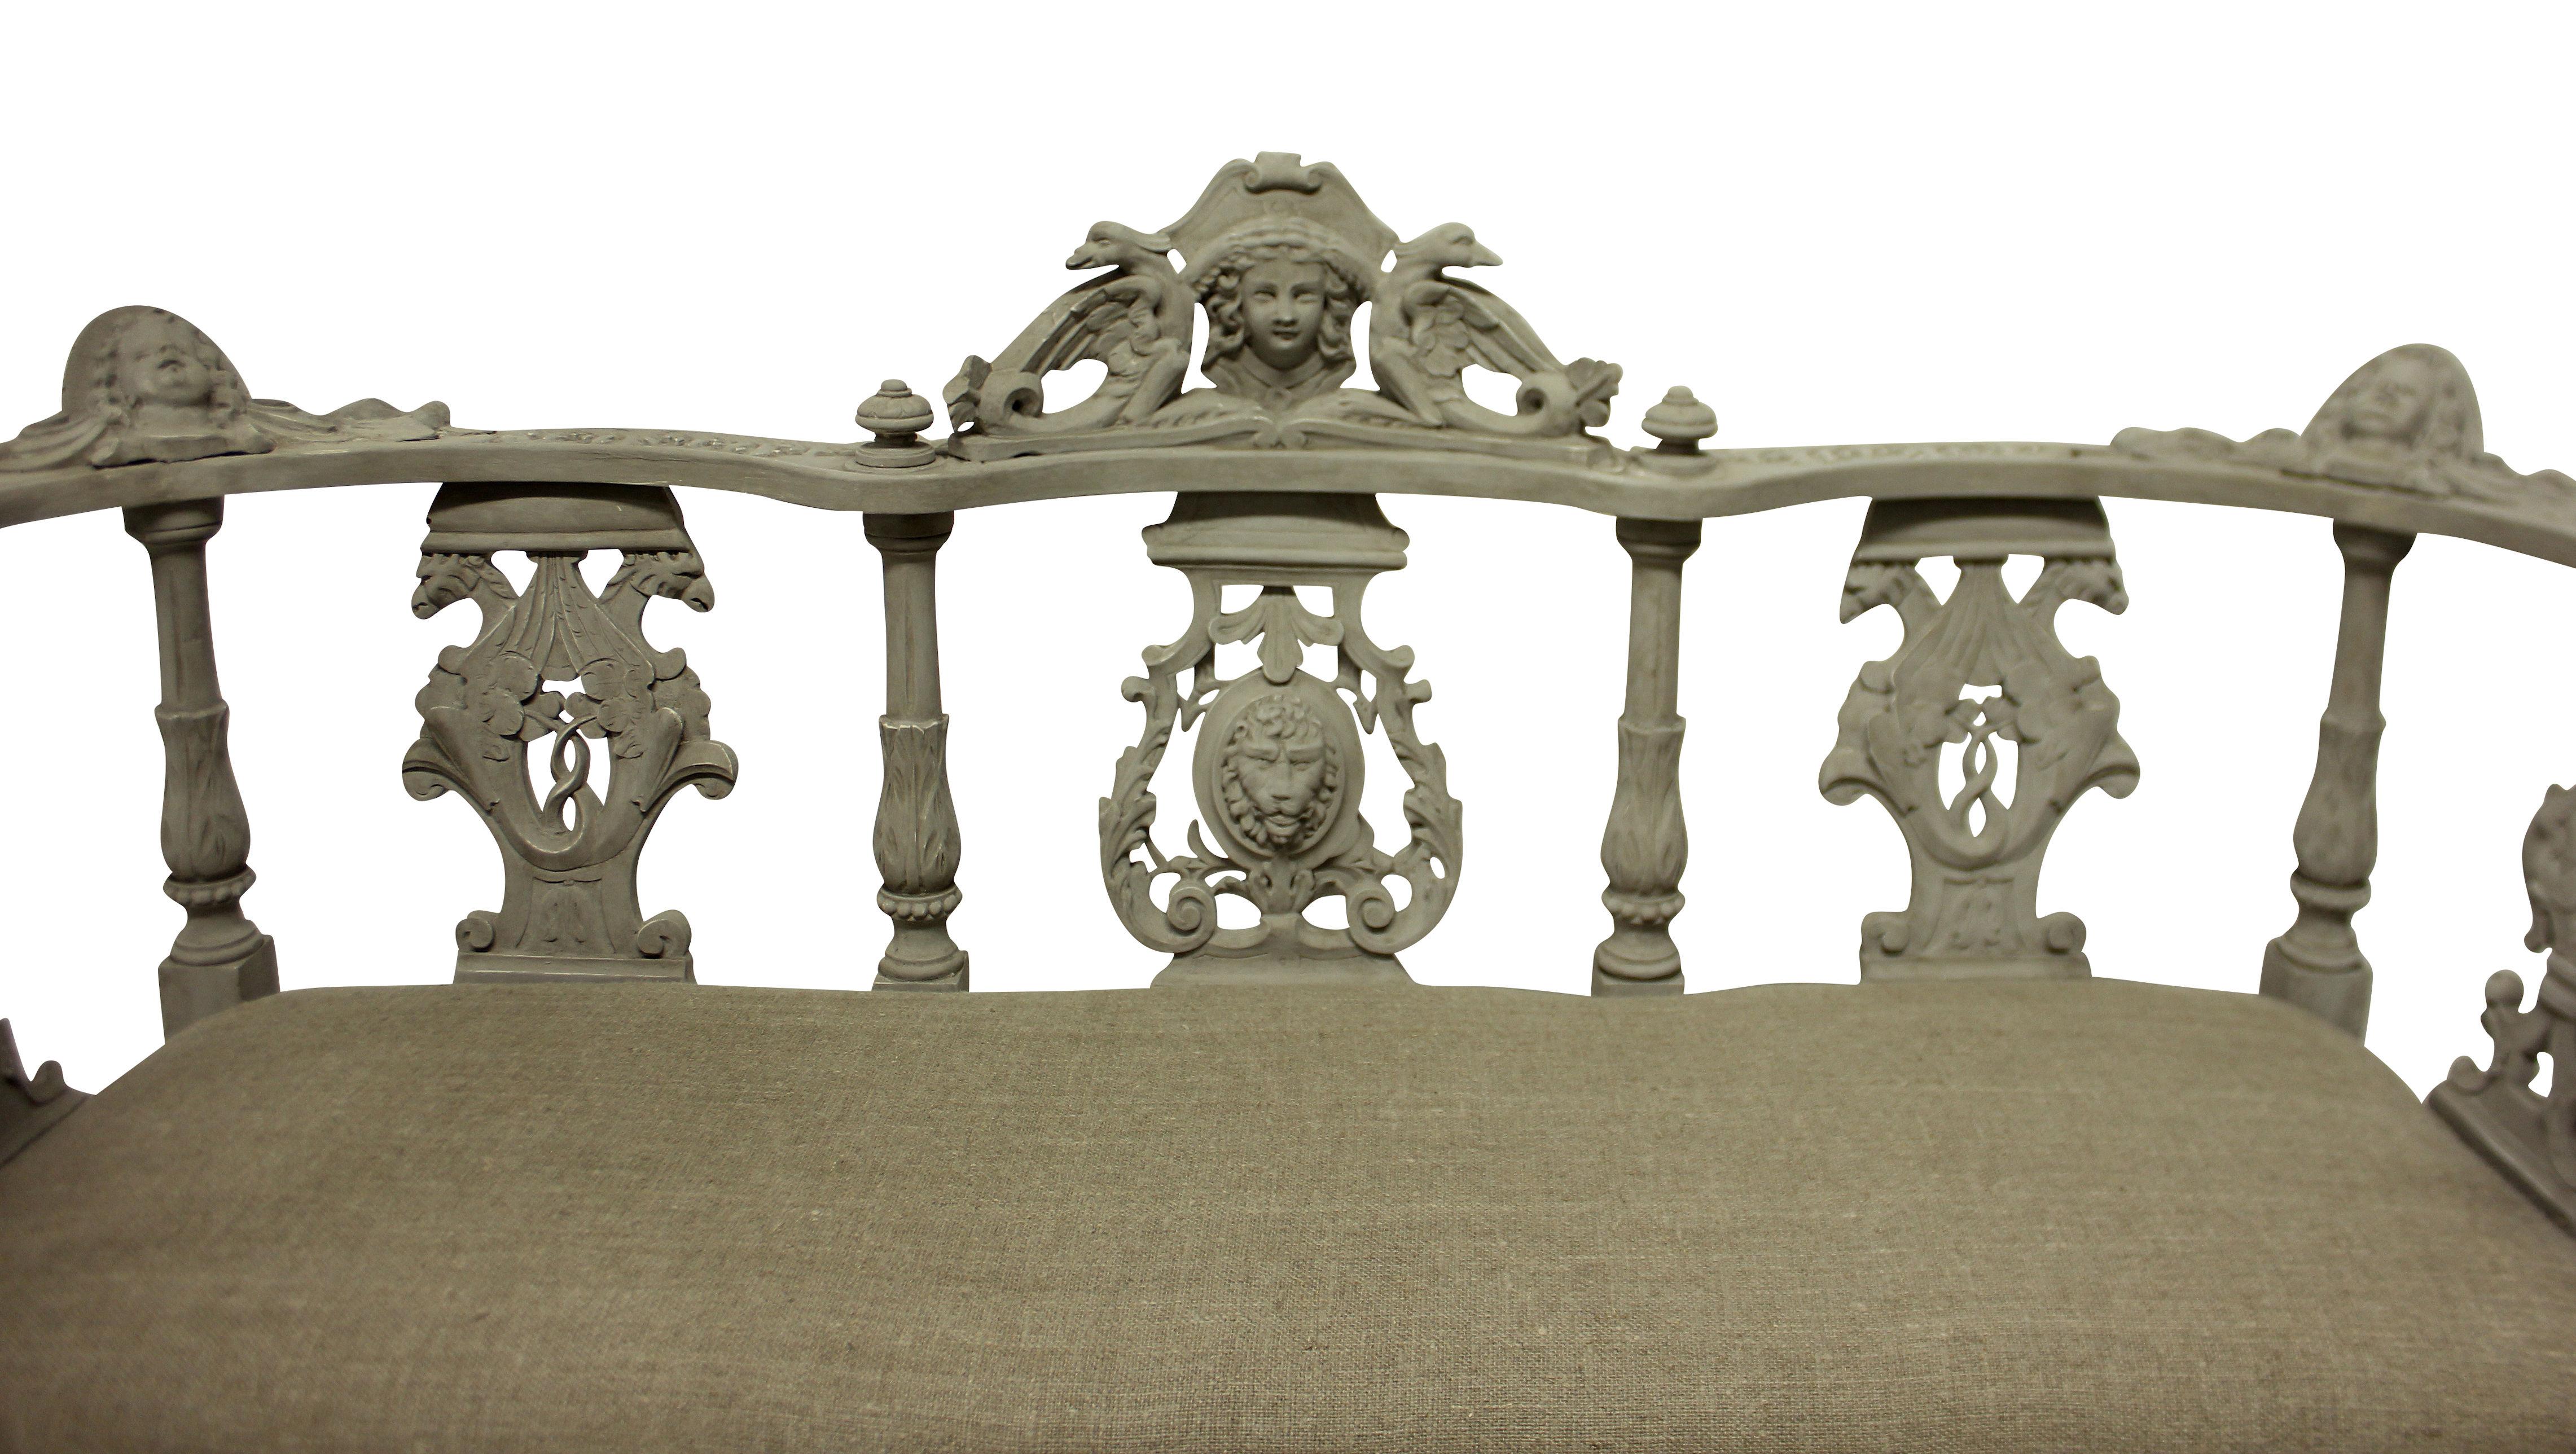 An Irish hall seat in finely carved and painted mahogany. Depicting mythological beasts, neoclassical elements and shamrock. Newly upholstered in raw linen.